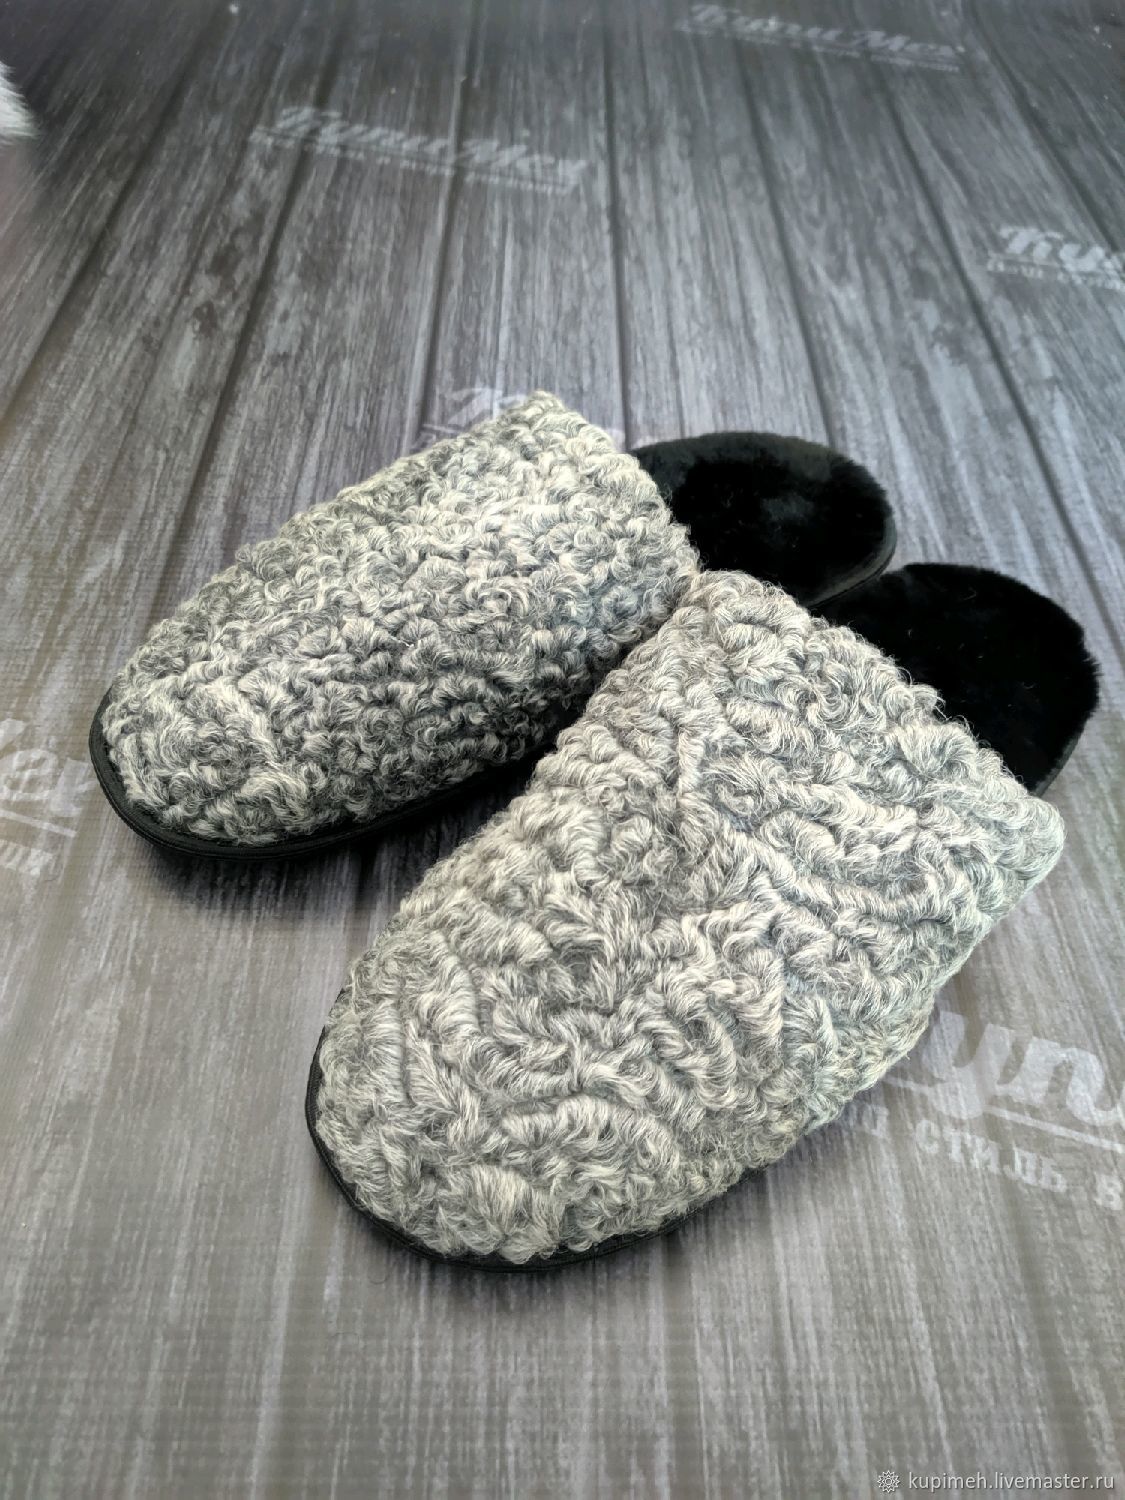 Men's Astrakhan Slippers Exclusives, Slippers, Nalchik,  Фото №1